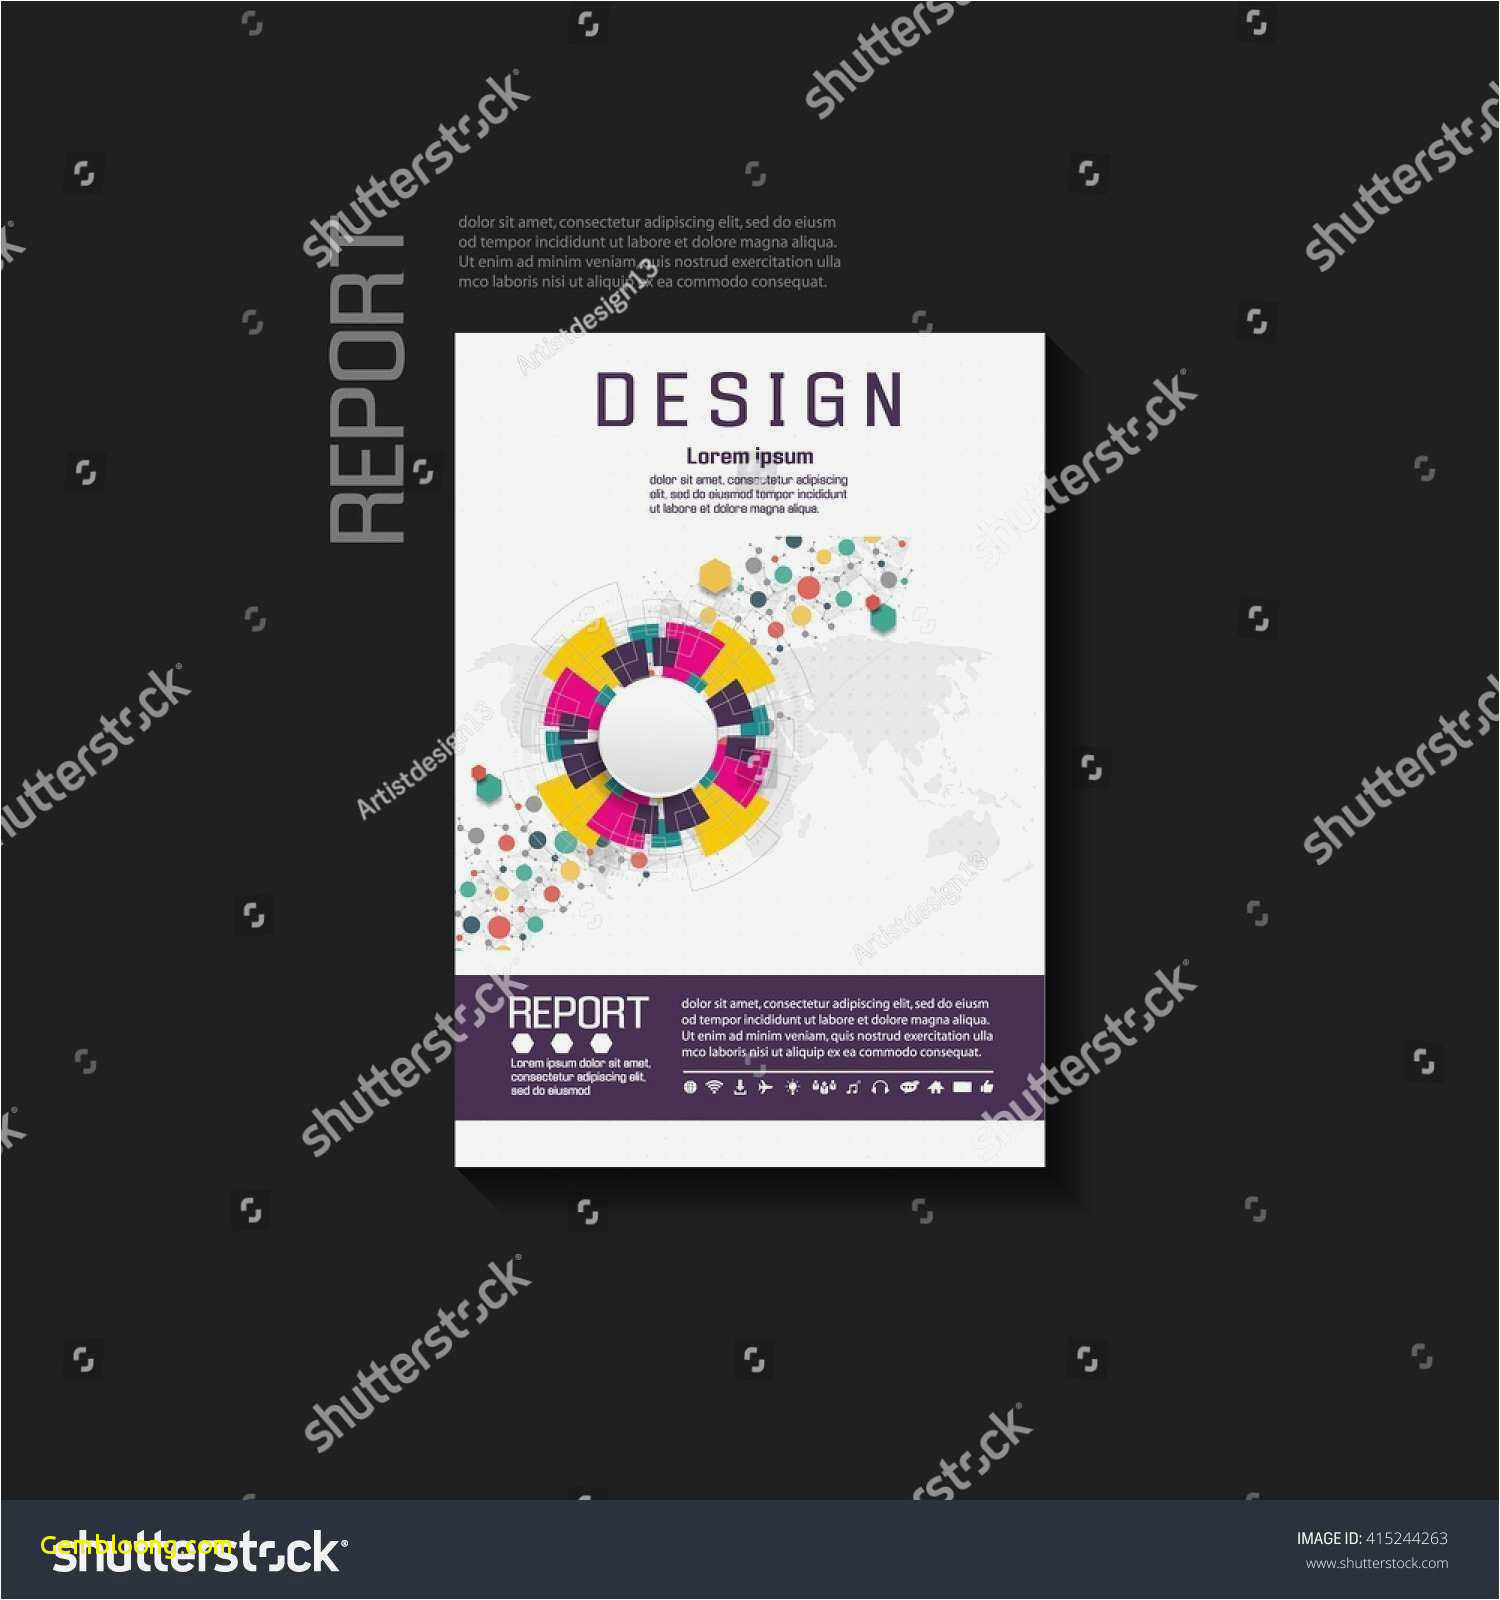 Free Business Card Psd Templates Valid Business Card Shop Of Photoshop Business Card Template